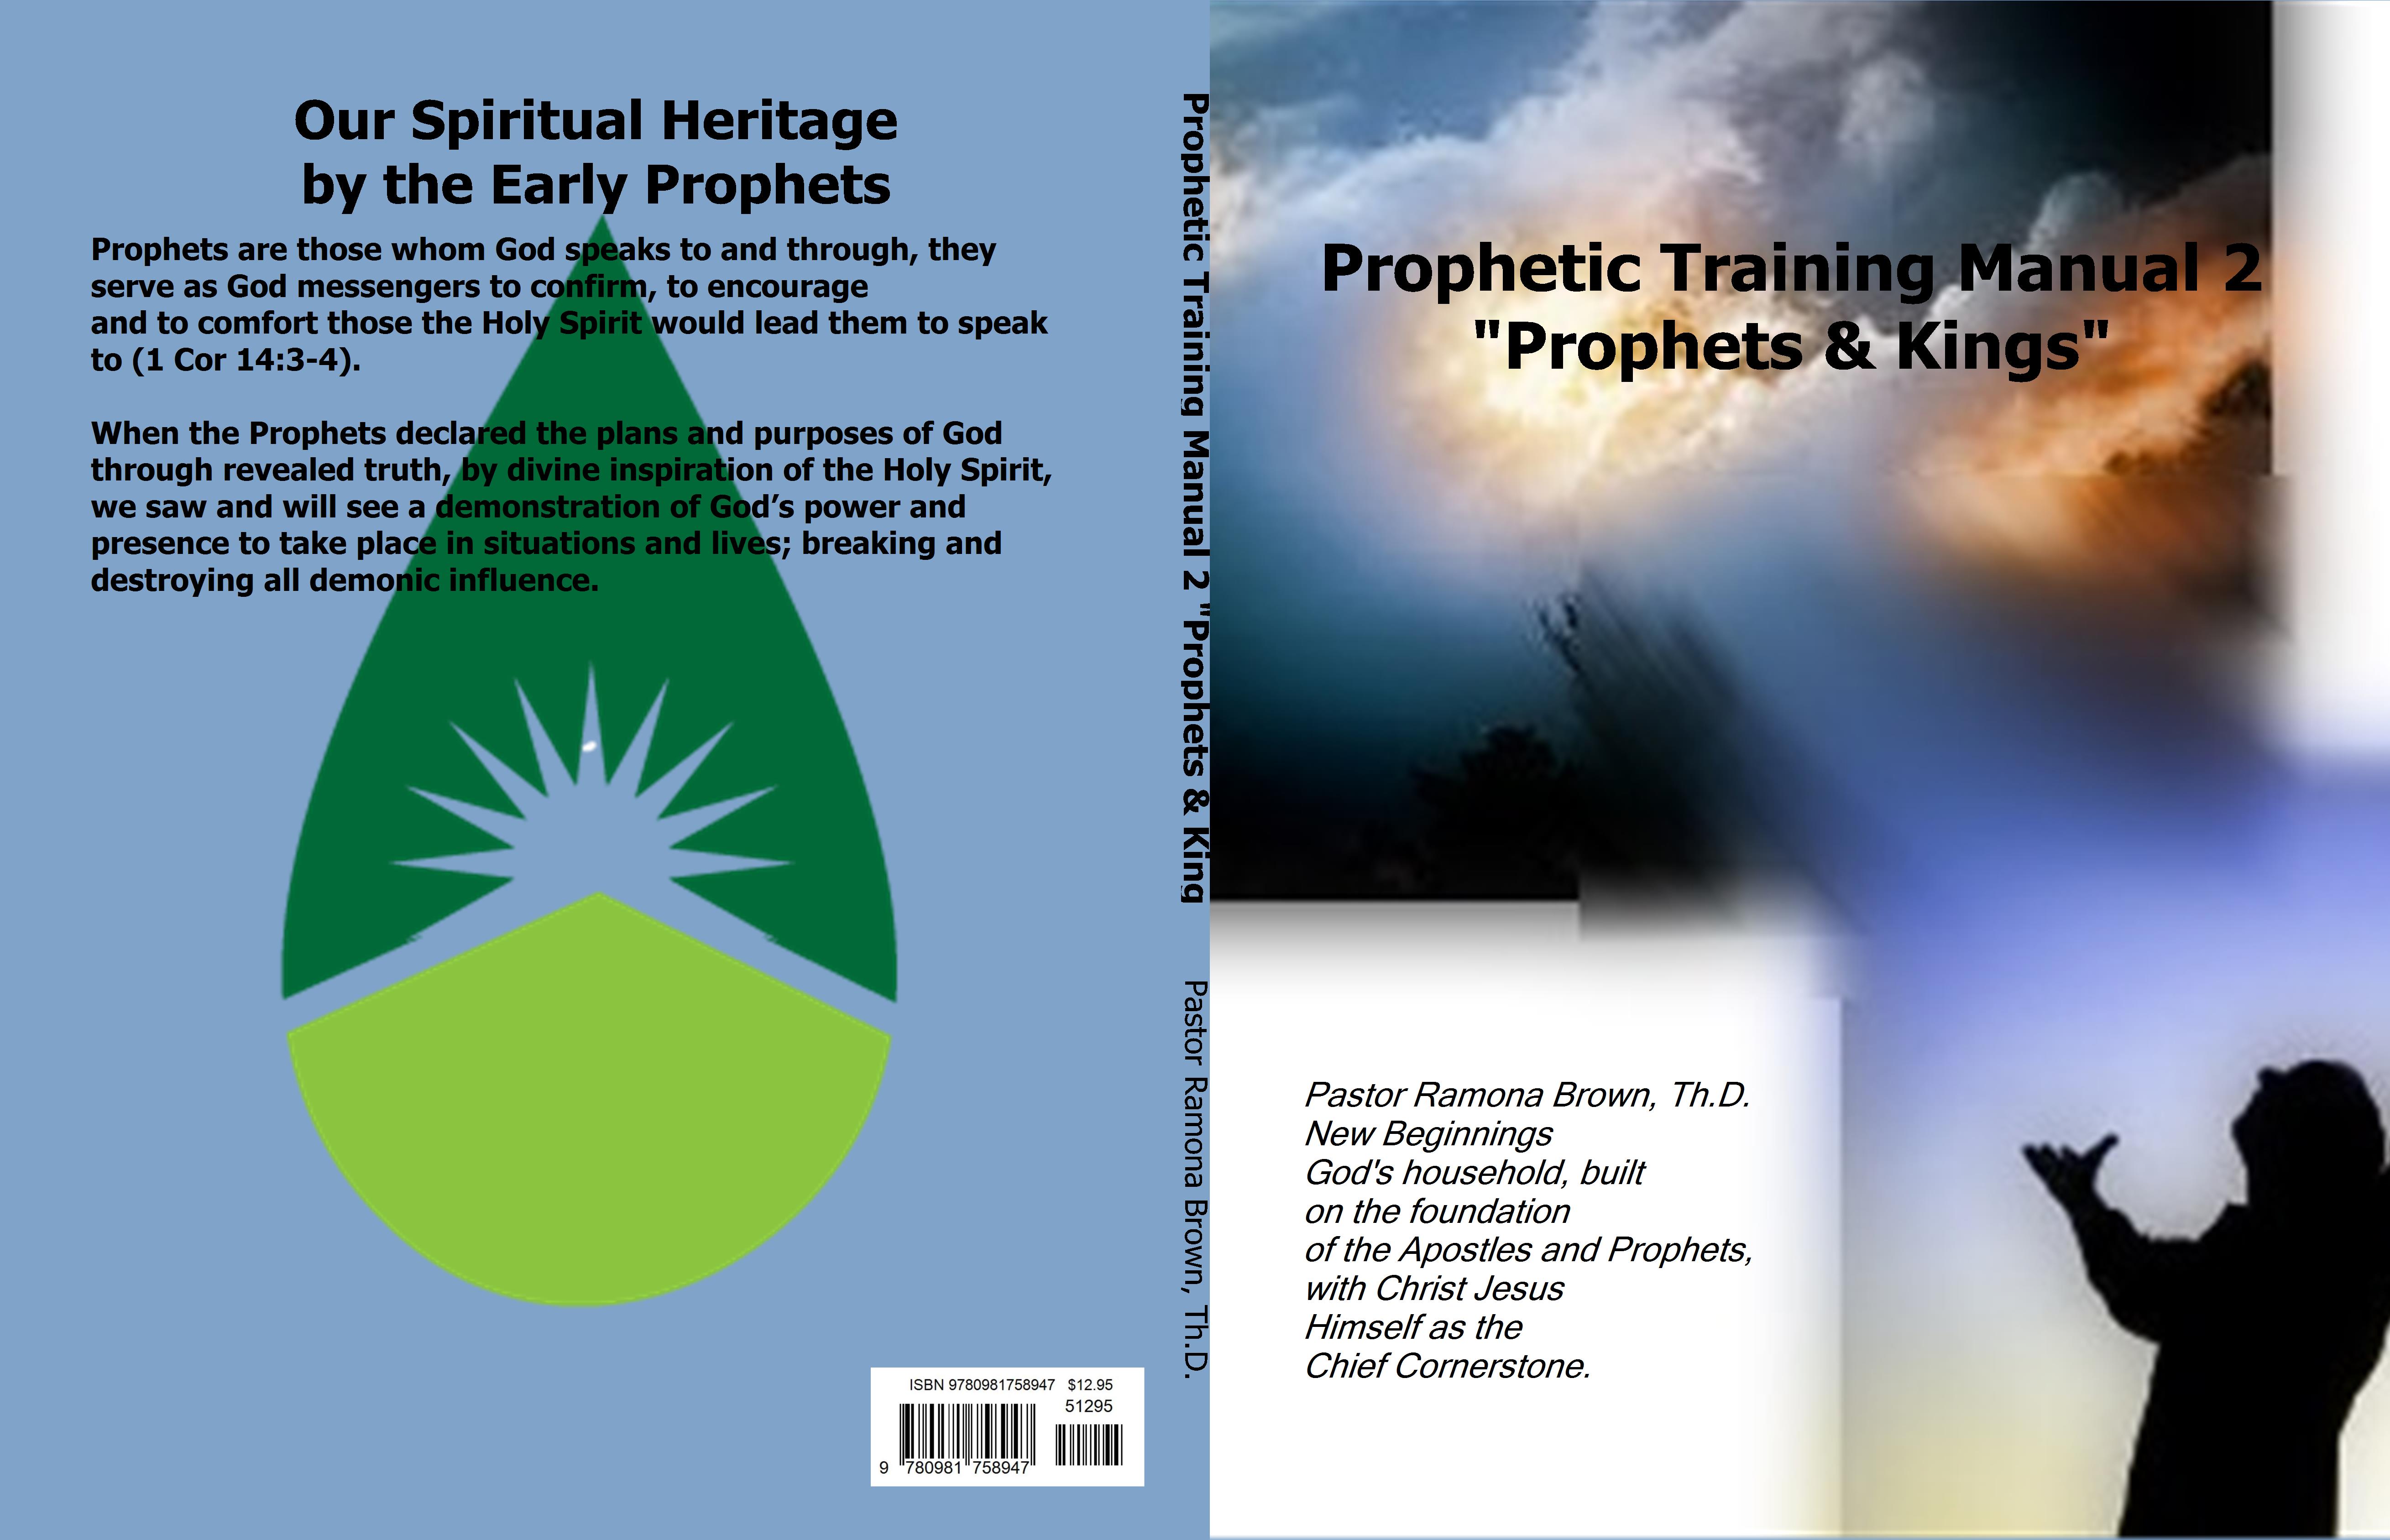 Prophetic Training Manual 2 "Prophets & Kings" cover image